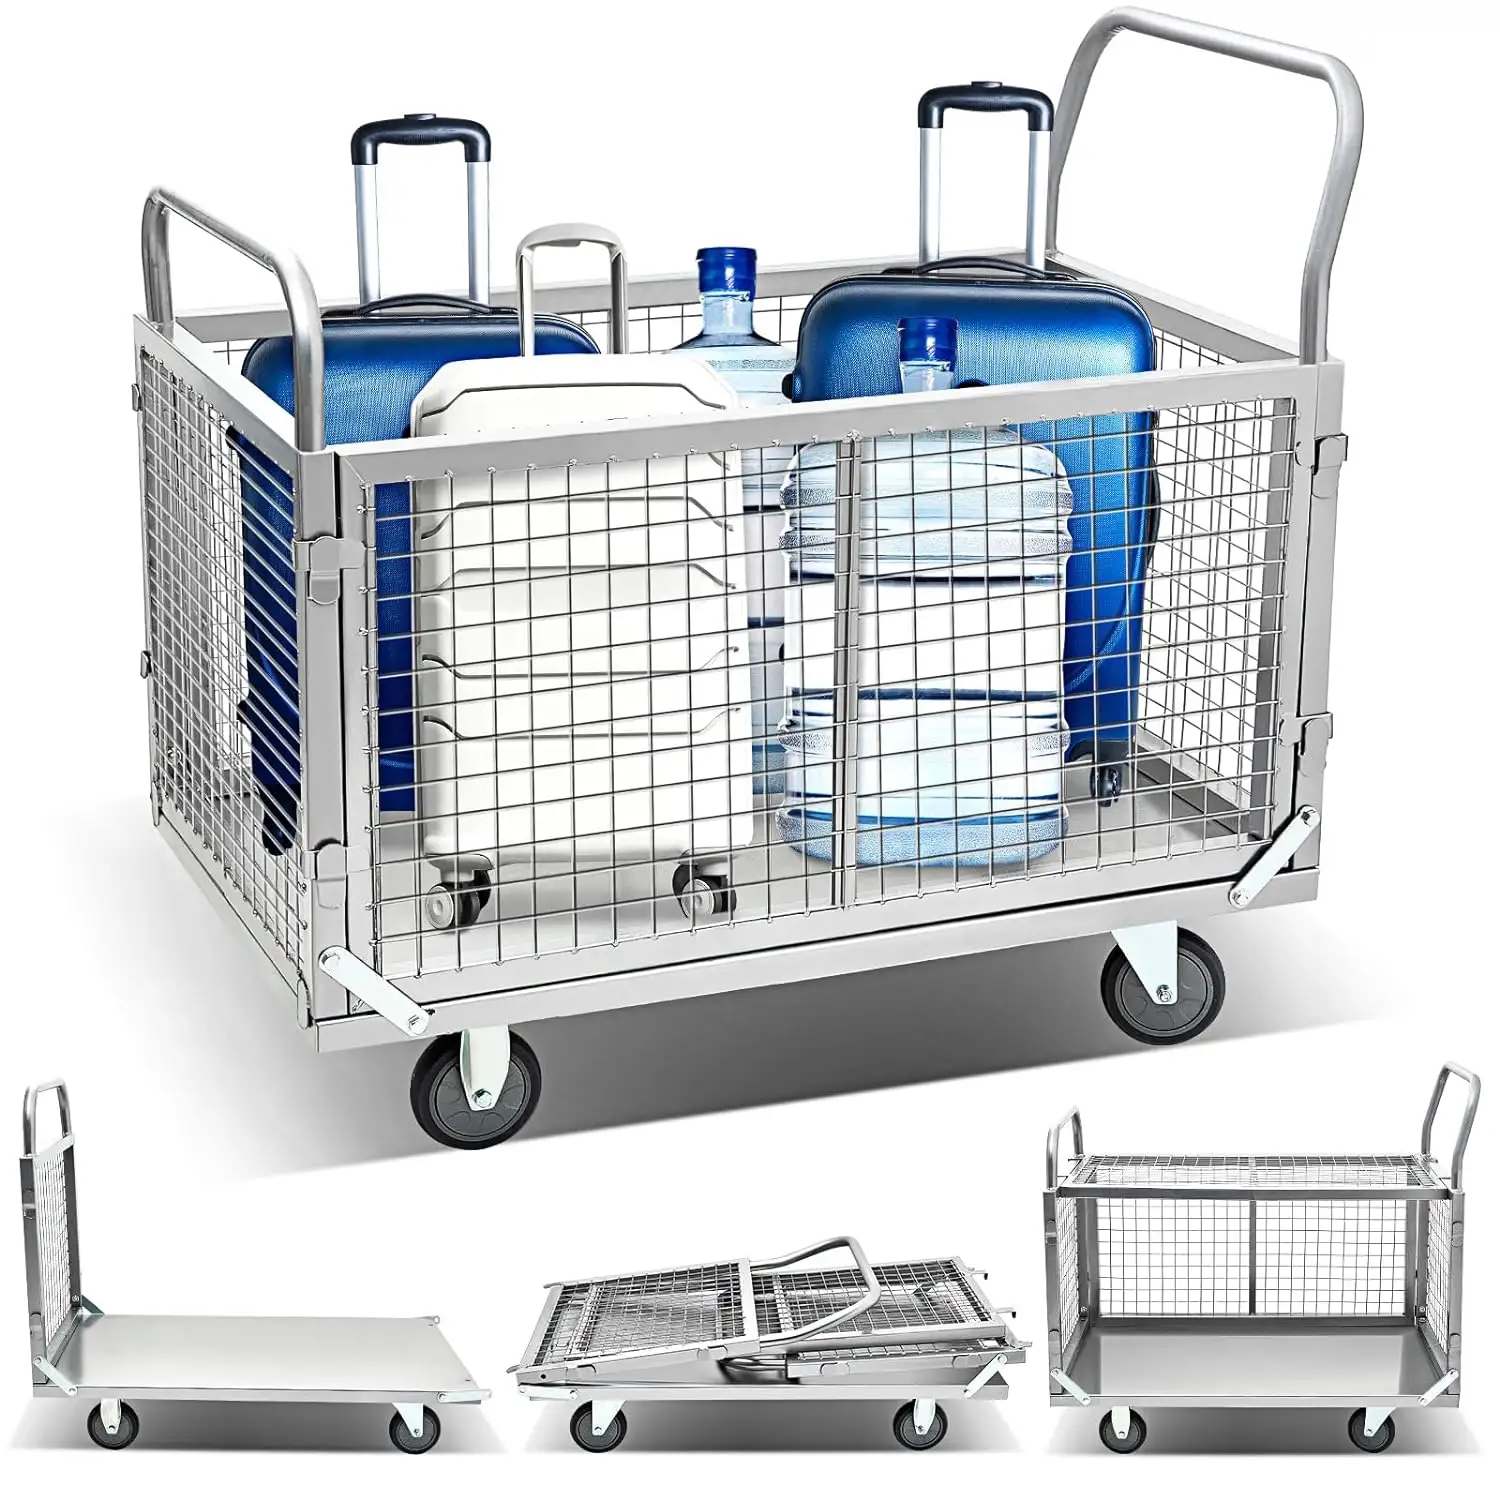 Platform Truck Cart with Cage Large Foldable Flat Cart Heavy Duty Push Cart for Grocery Moving Laundry